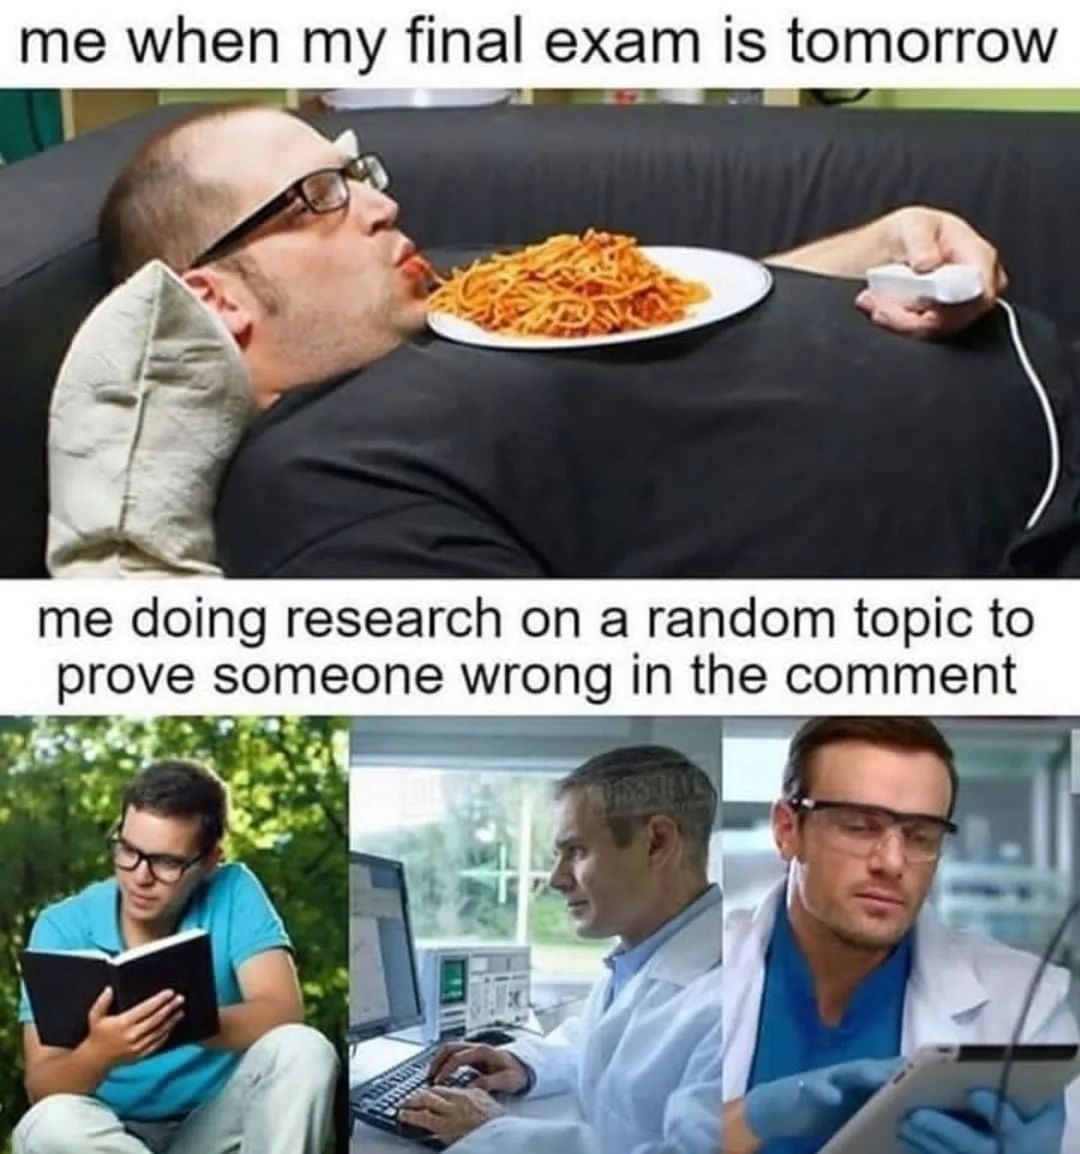 dank memes and pics - final exam meme - me when my final exam is tomorrow me doing research on a random topic to prove someone wrong in the comment